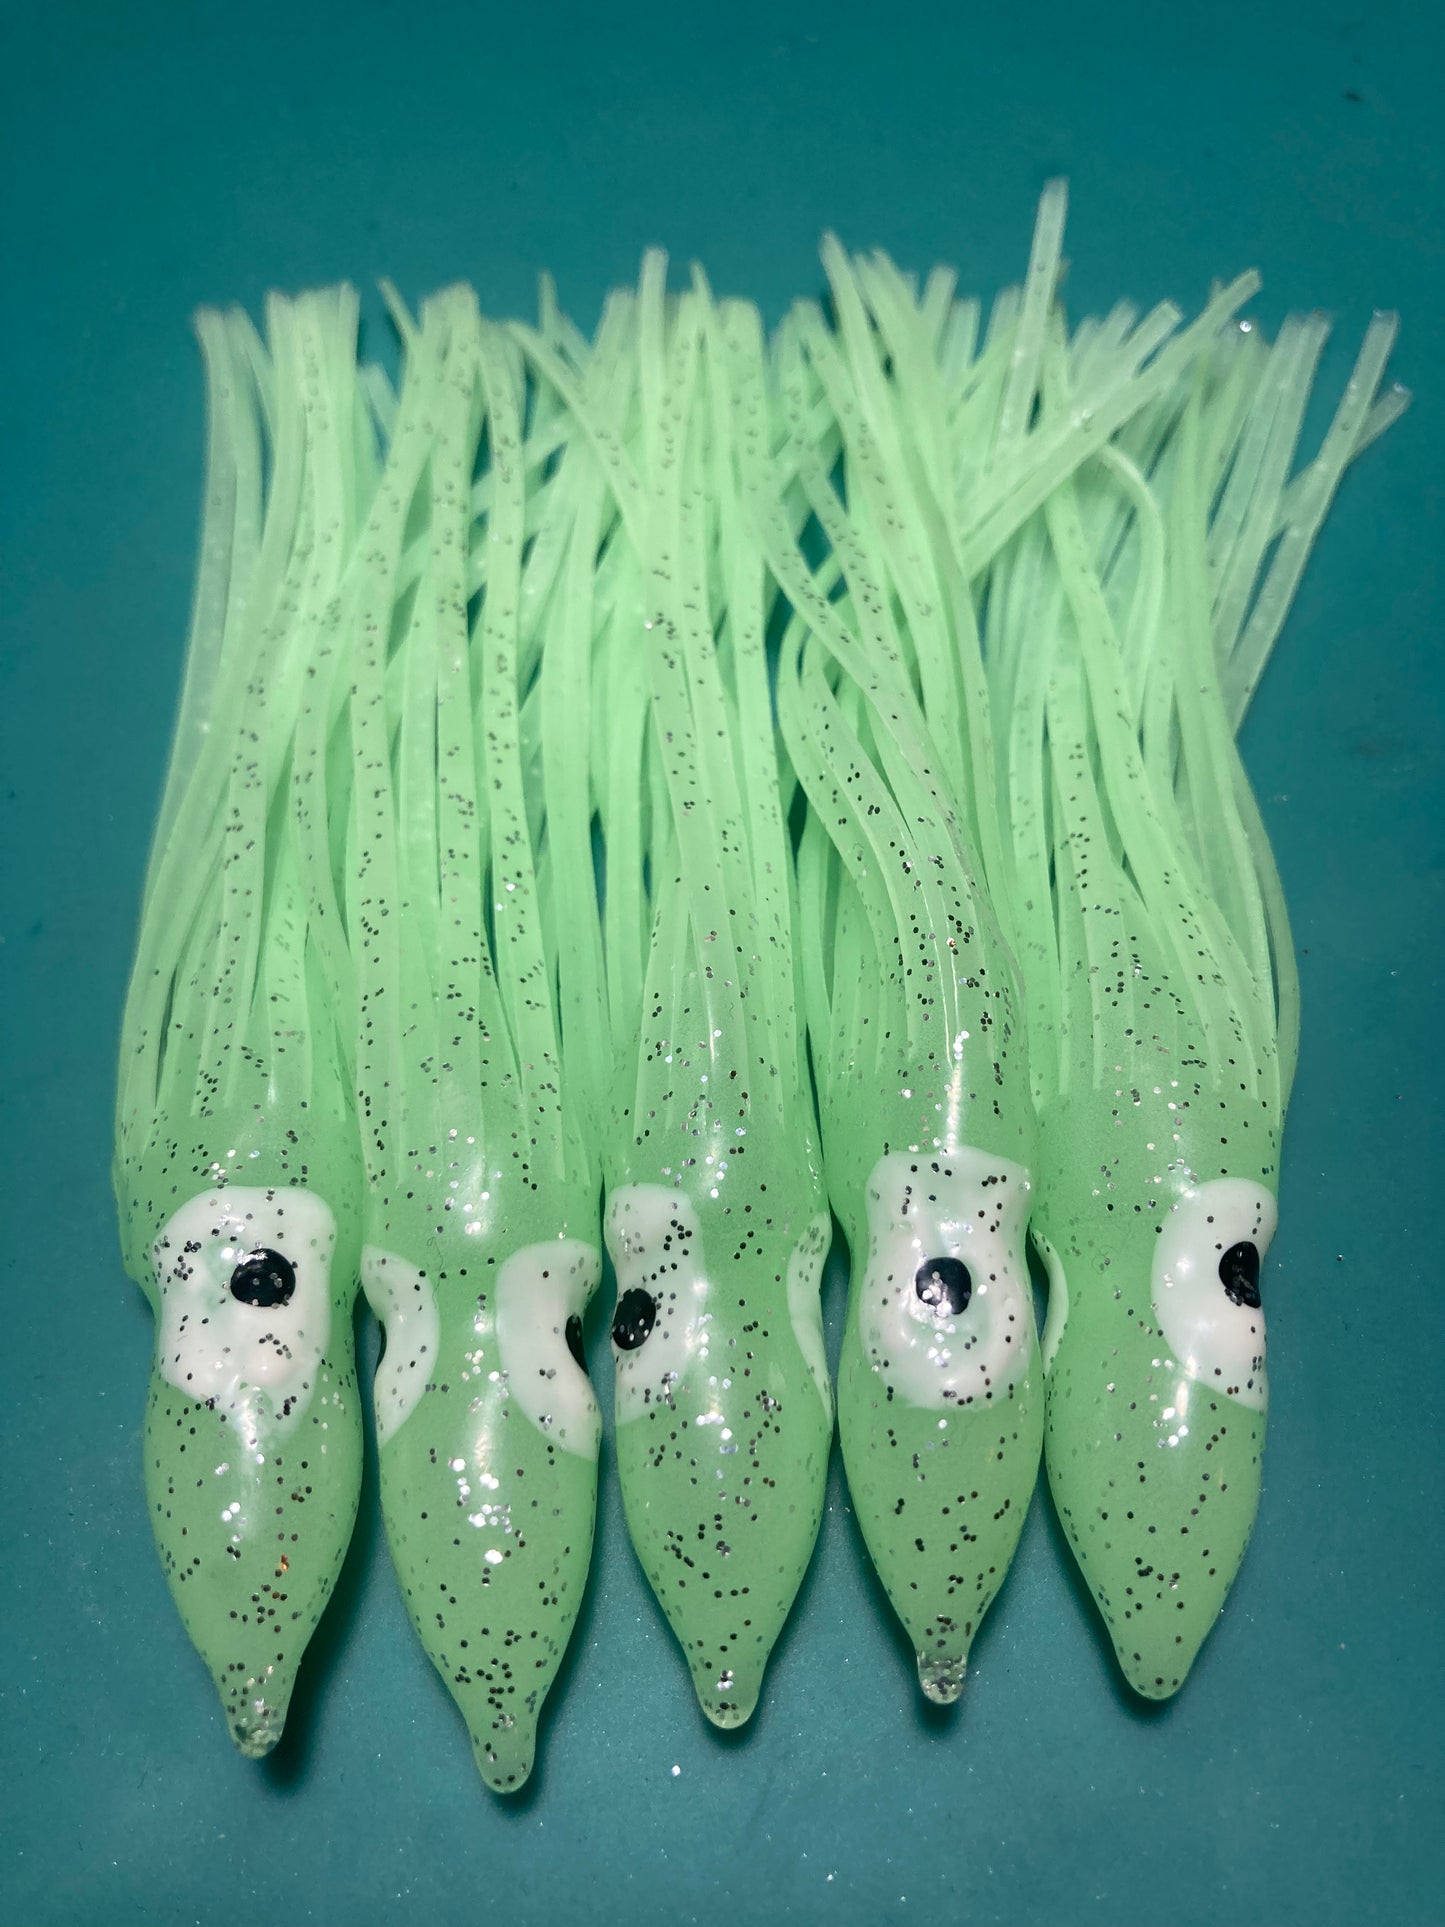 10 pcs 4.75 Hoochies Squid Skirts Octopus Trolling Fishing Lures Choose  Colors - La Paz County Sheriff's Office Dedicated to Service